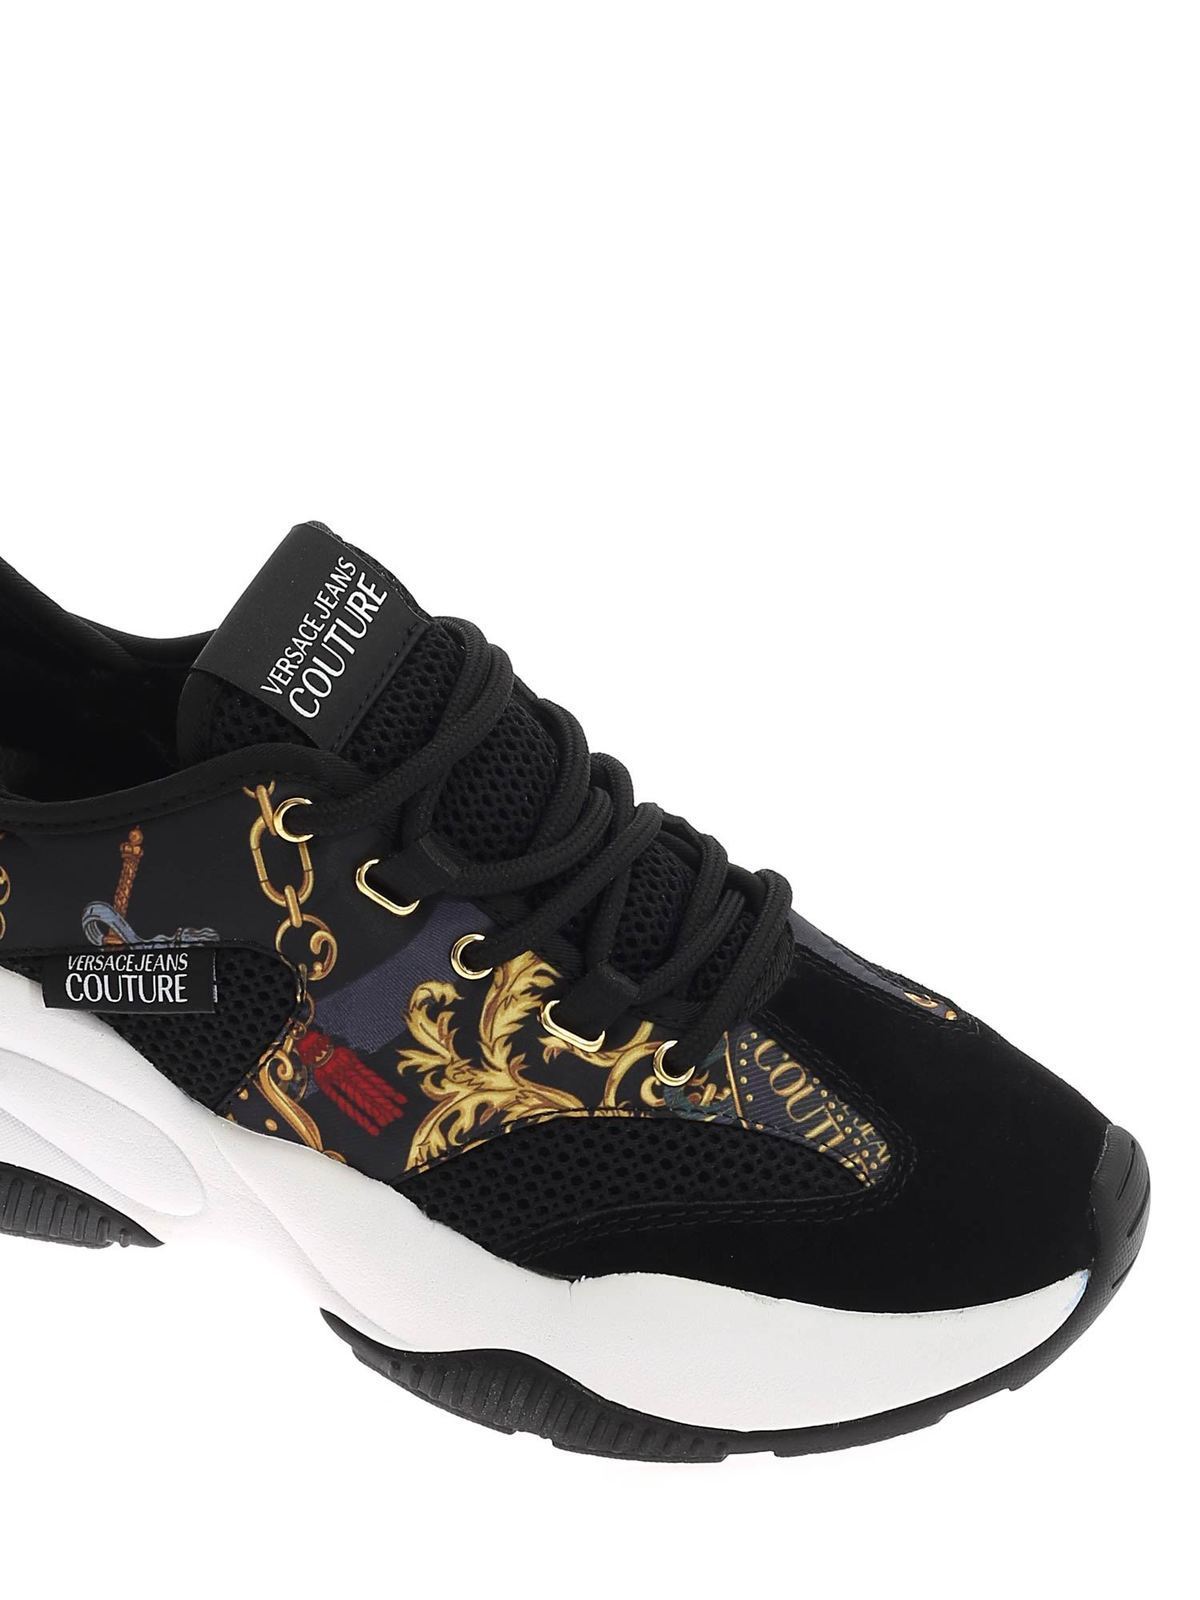 versace jeans embossed sole trainer